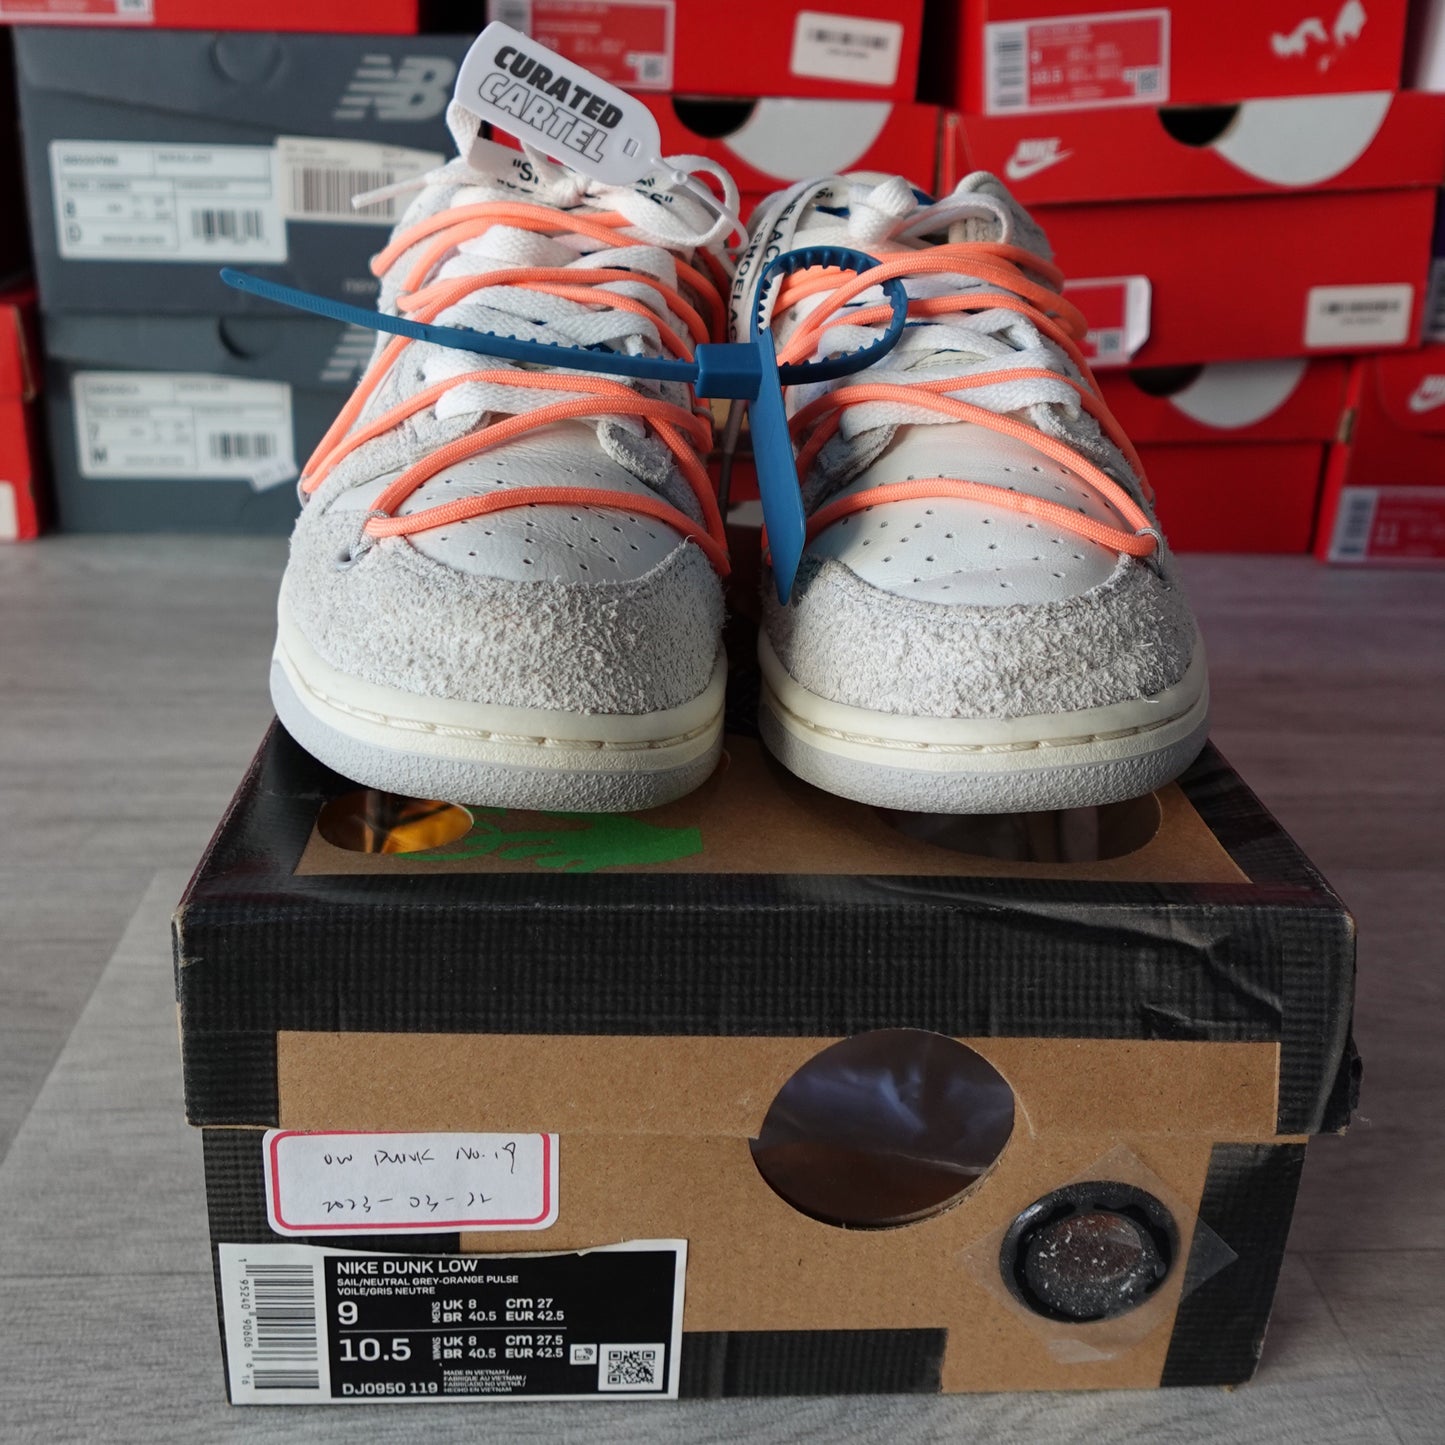 Nike Dunk Low Off-White “Lot 19” US9